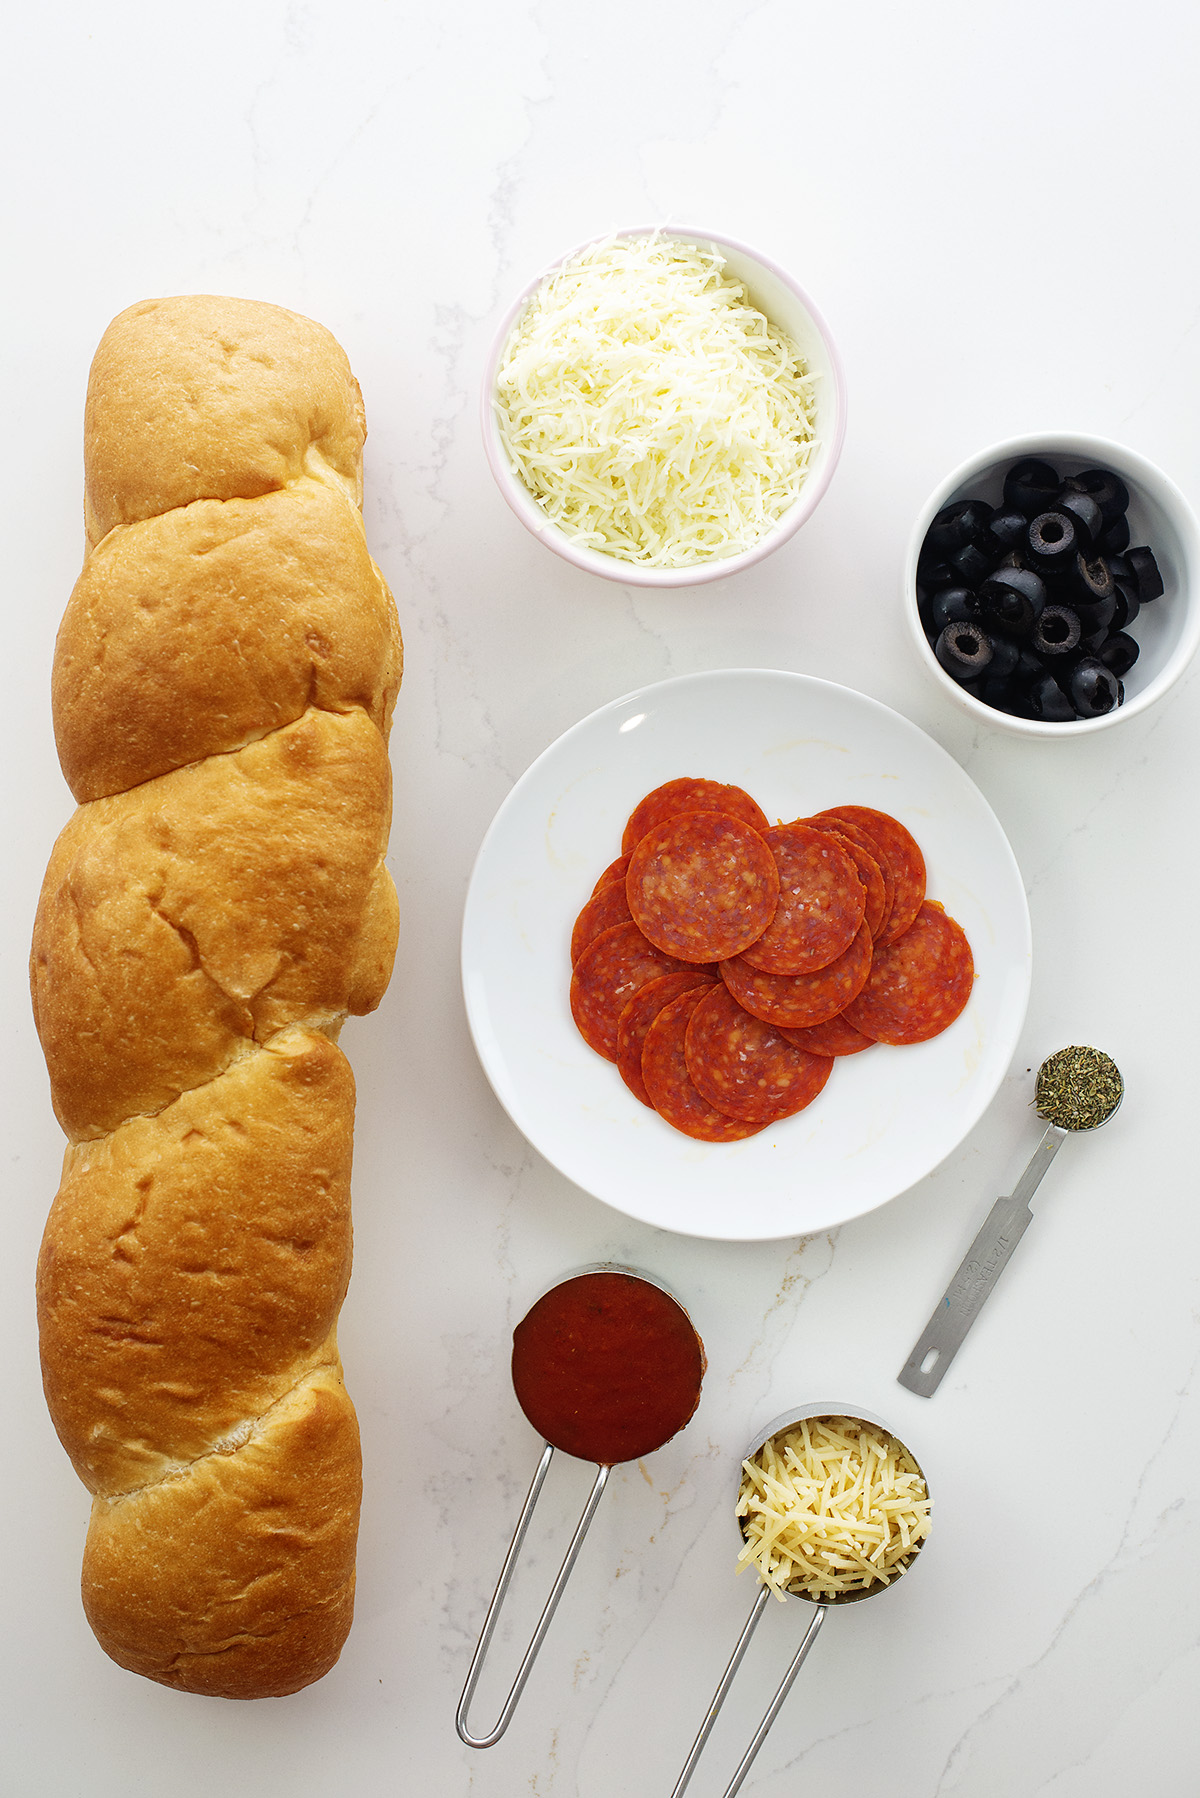 Ingredients for French bread pizza.